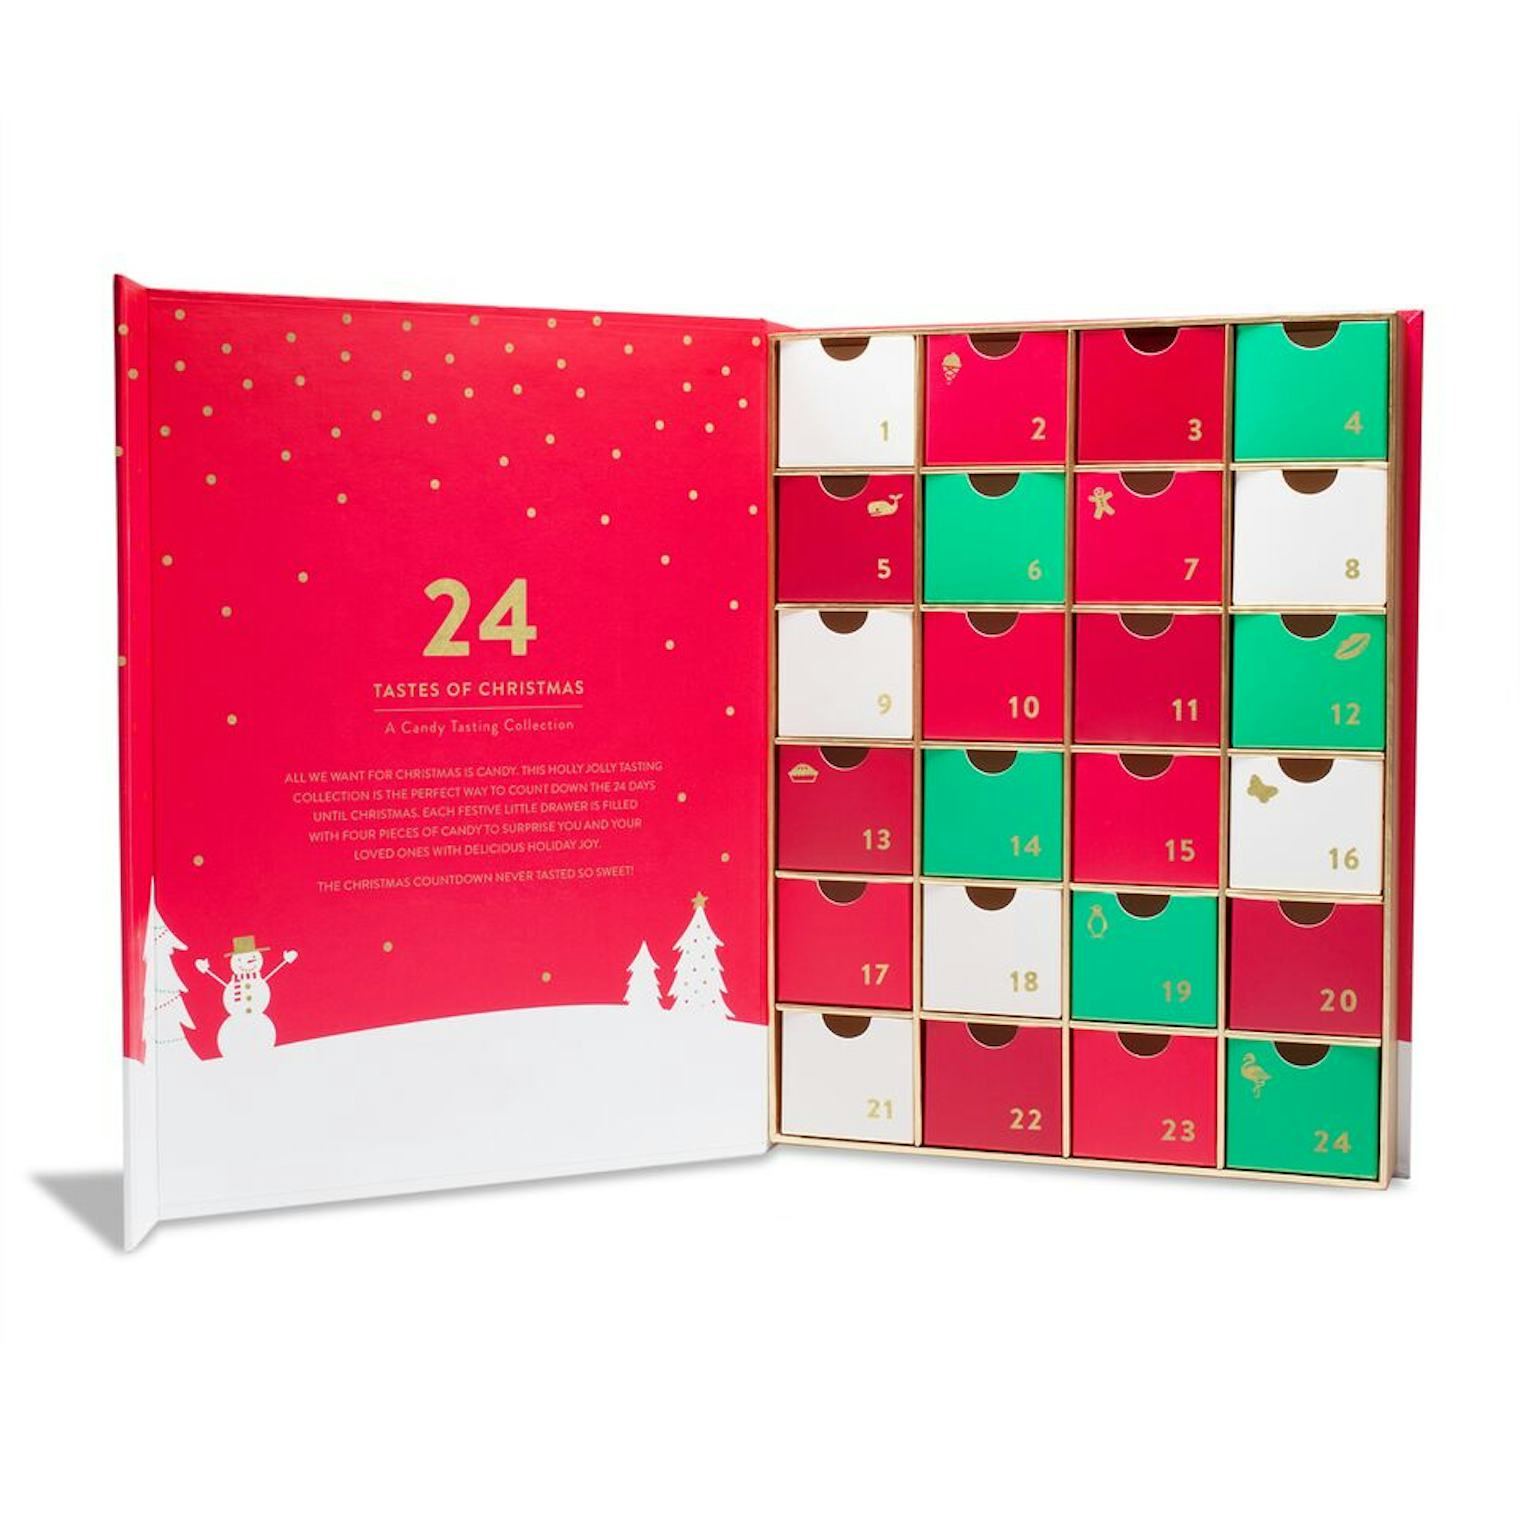 sugarfina-s-advent-calendar-for-2018-features-24-days-of-holiday-curated-candies